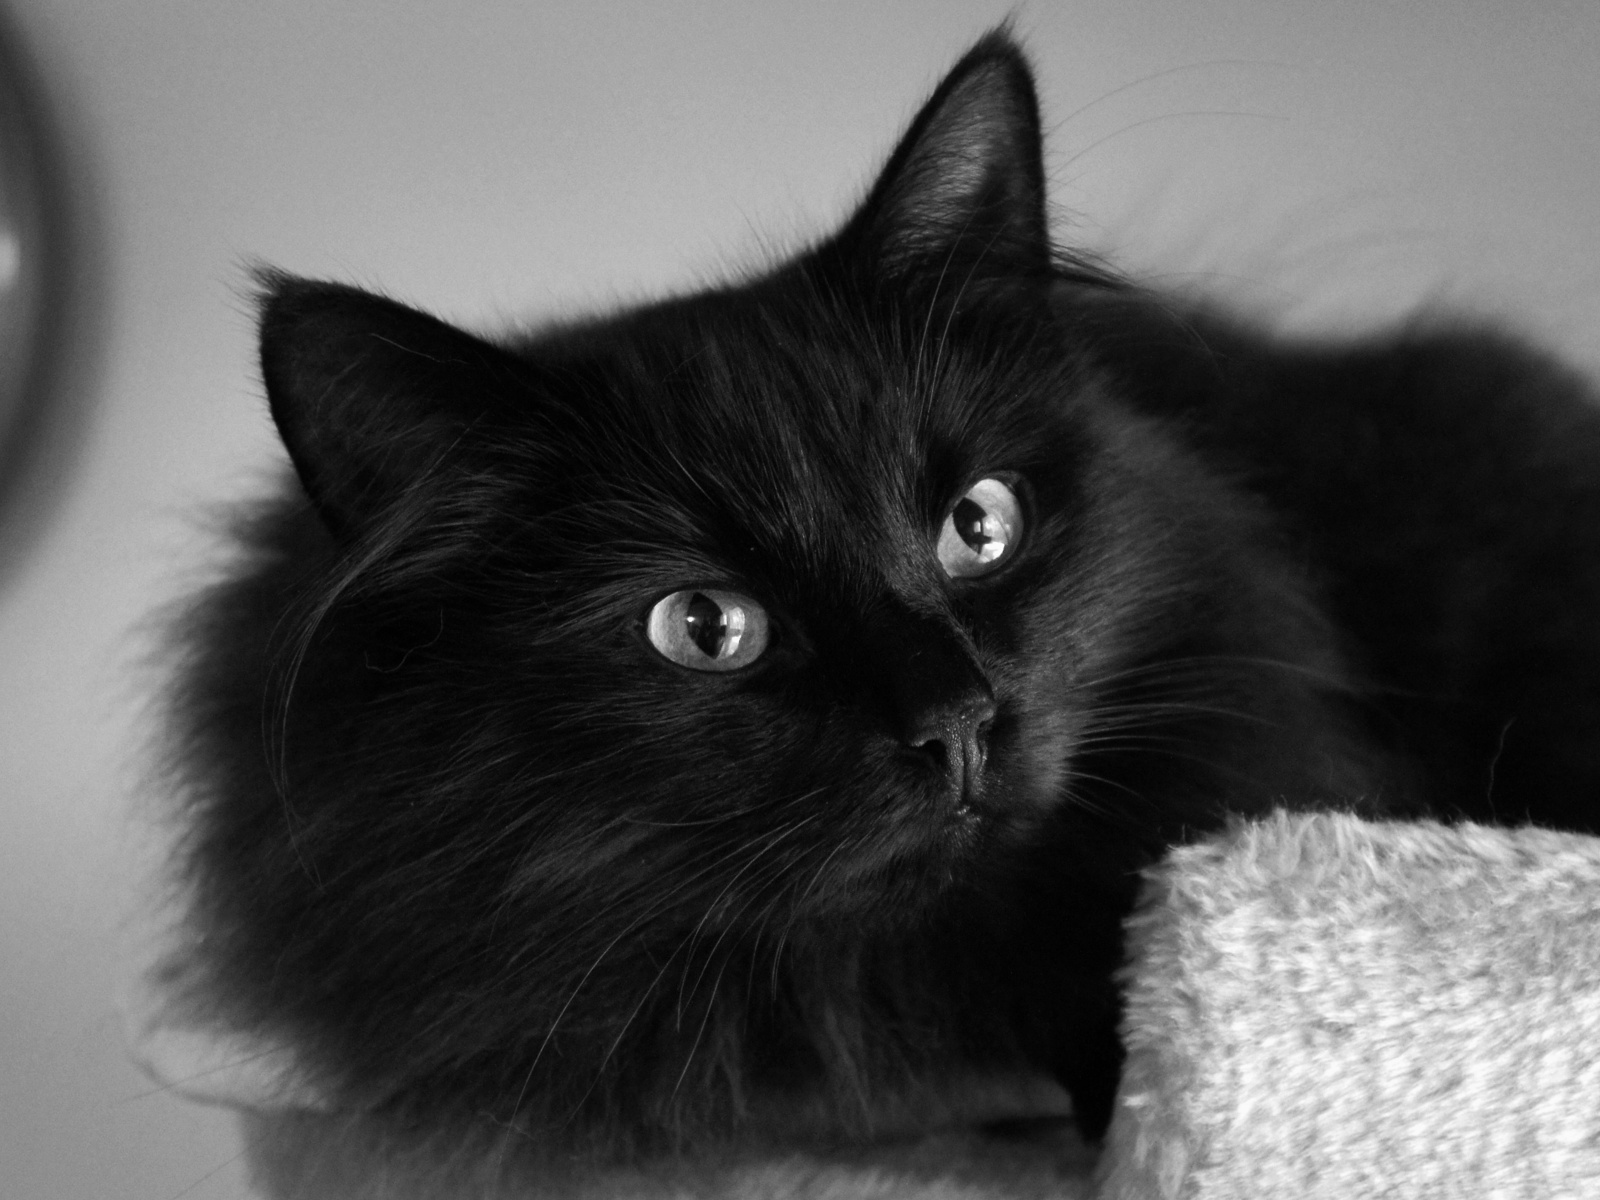 Beautiful fluffy black cat wallpapers and images - wallpapers, pictures